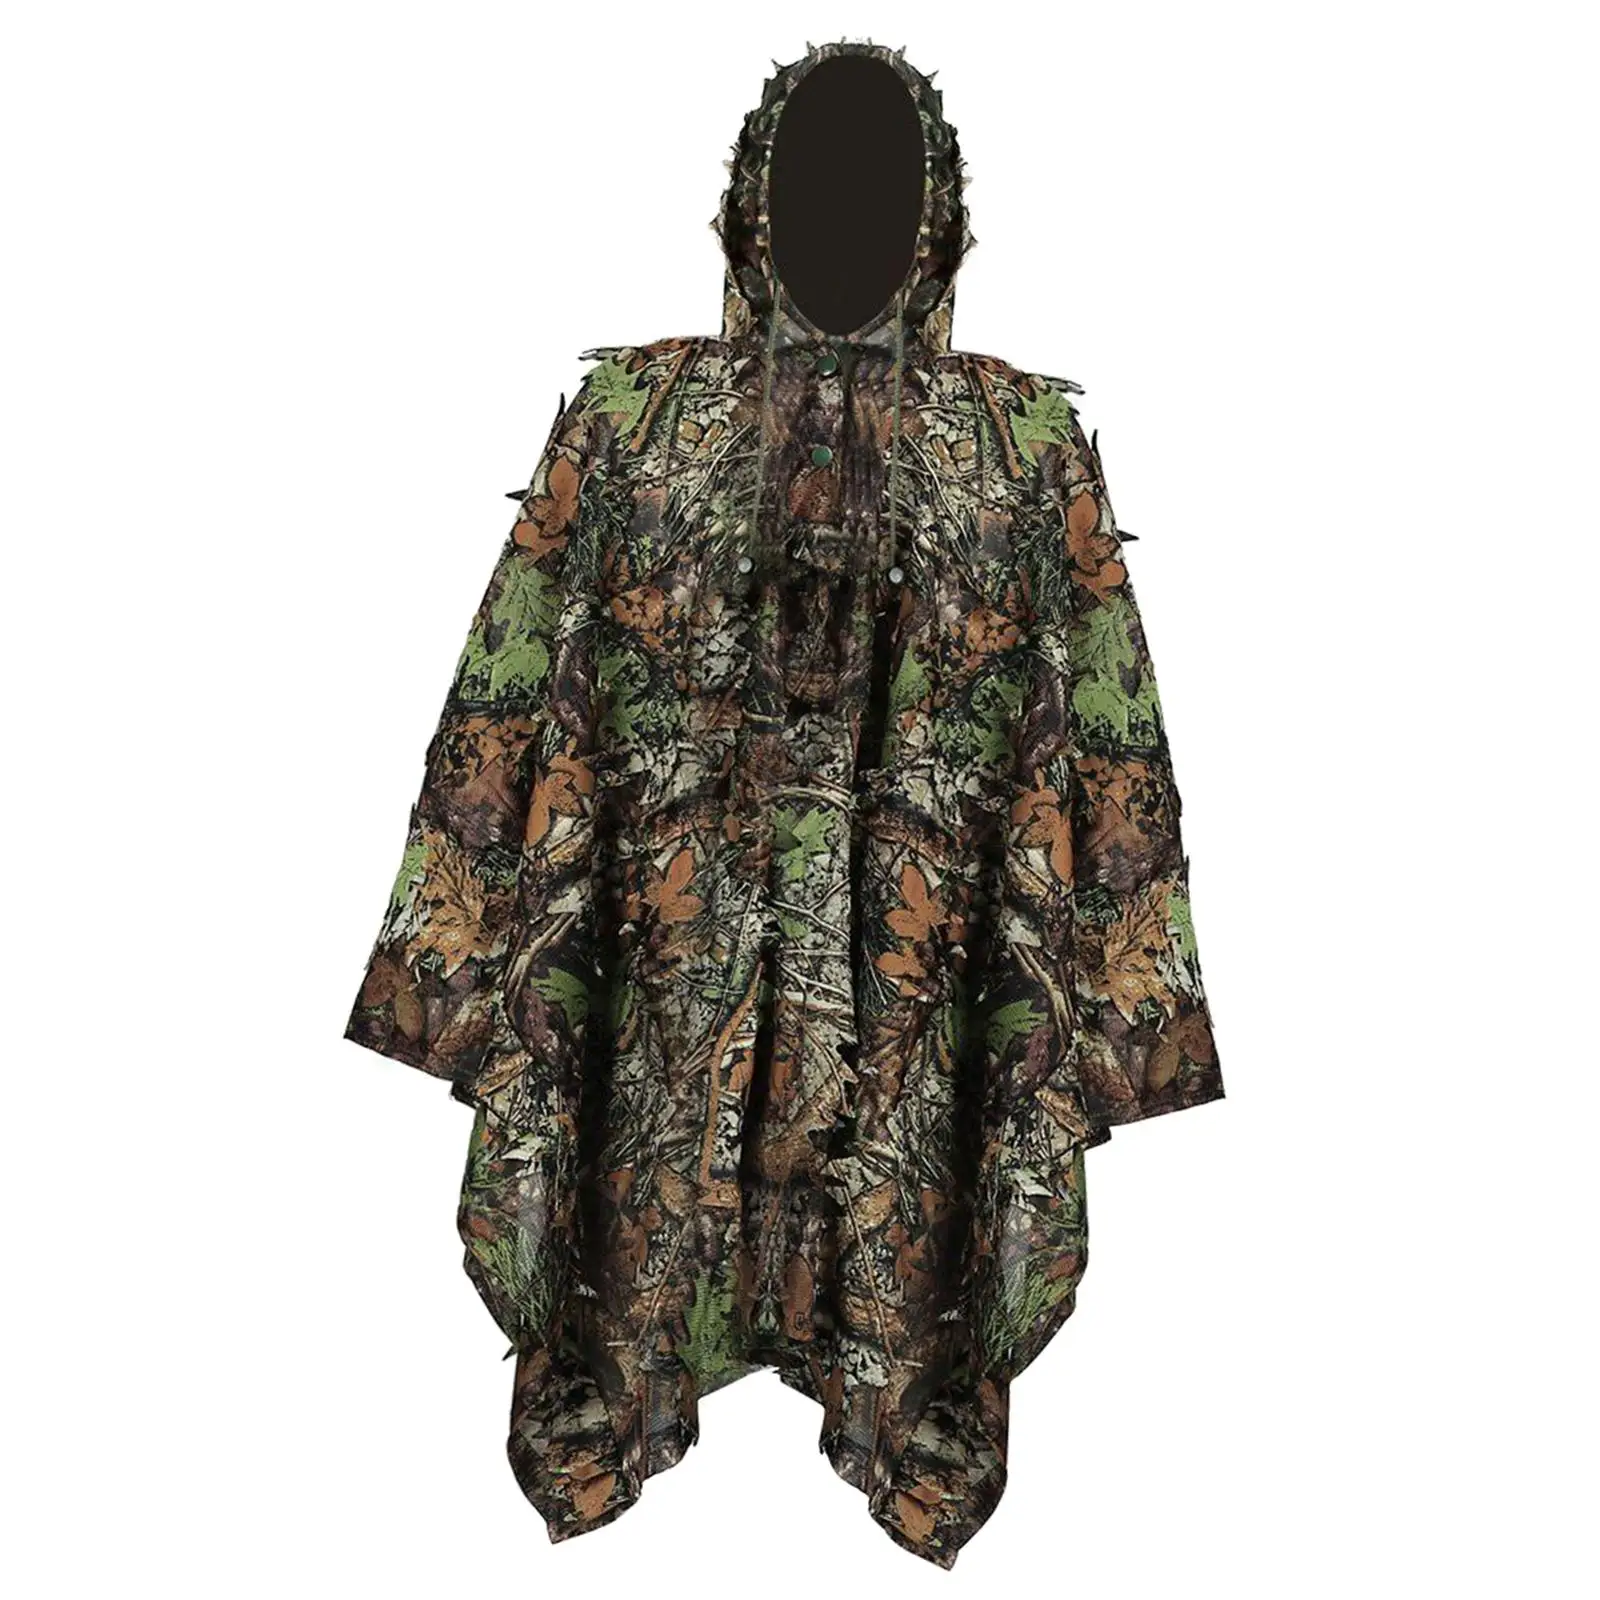 Ghillie Suit for Men Jacket Hood Camo Suit for Hunting Halloween Photography